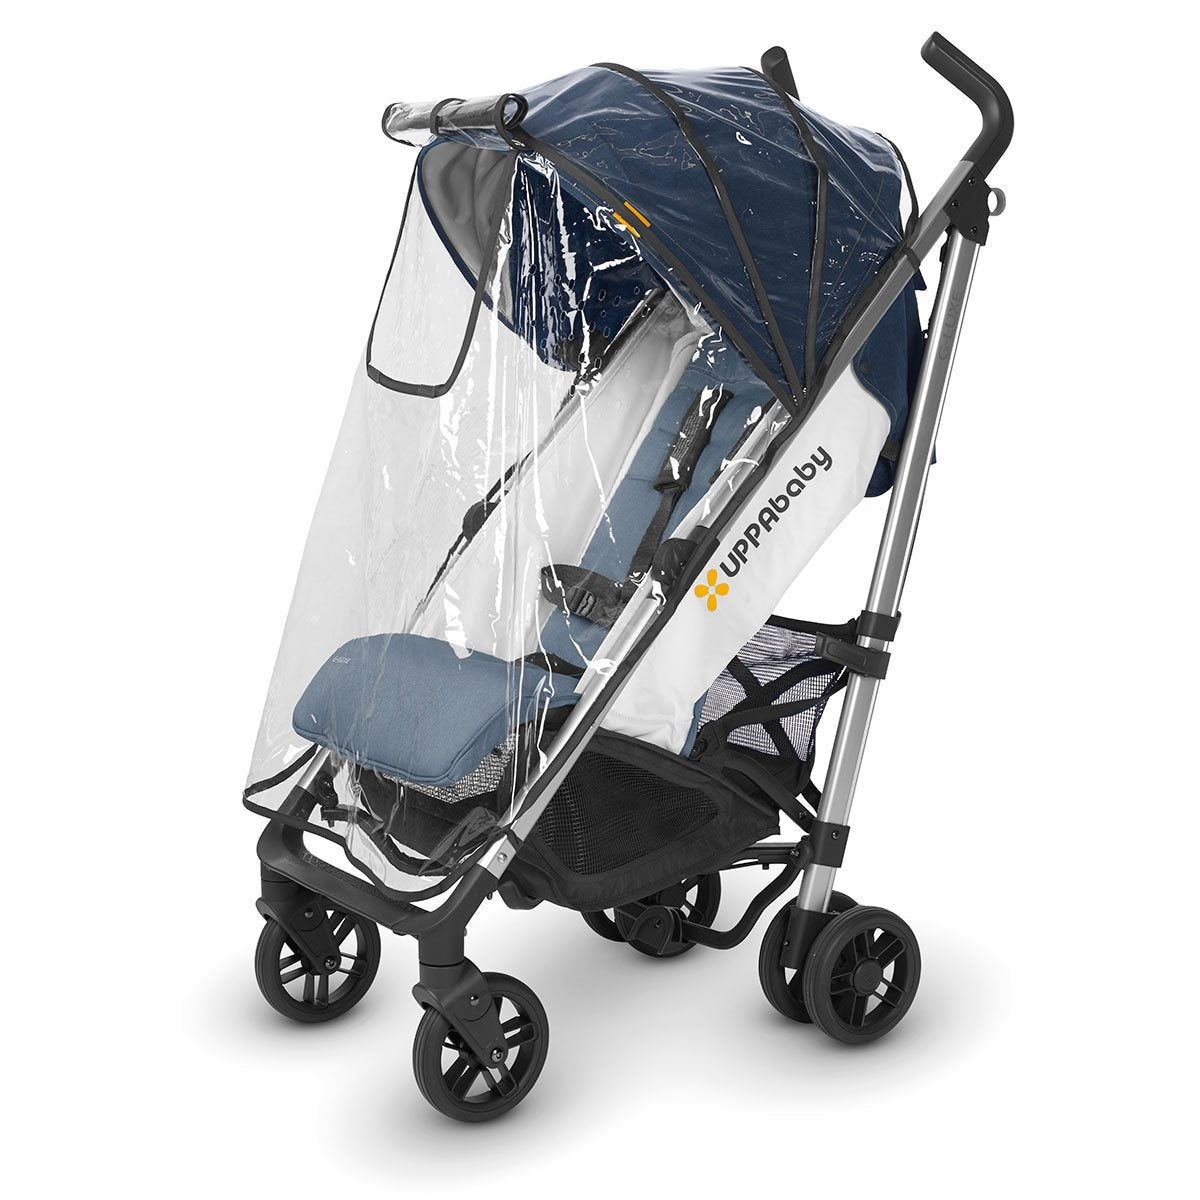 UPPAbaby Rain Shield for G-Luxe